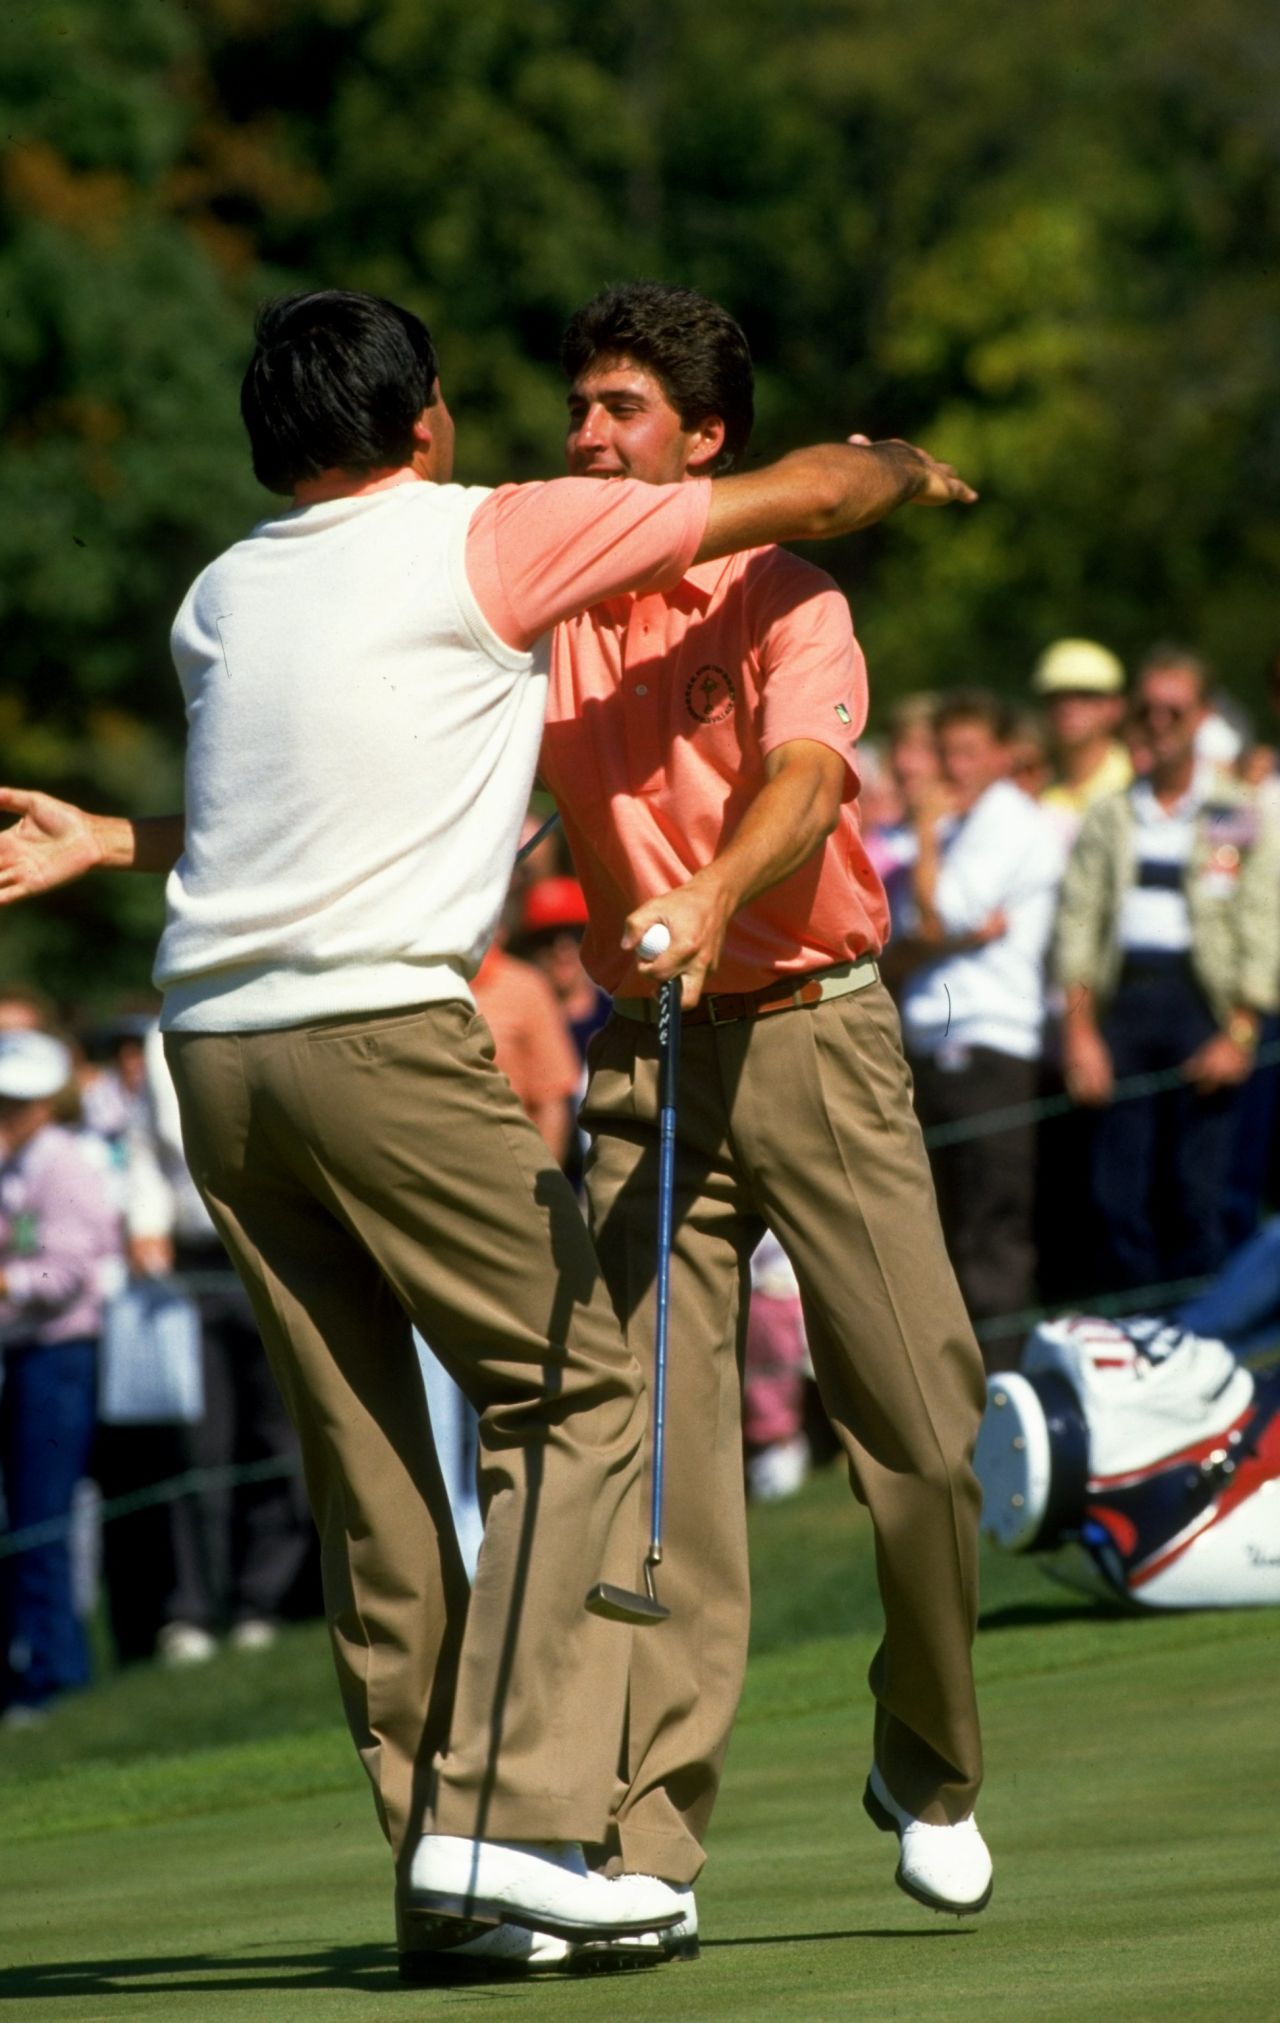 When mentioning Europe and the Ryder Cup, it is almost impossible not to think of Olazabal and the late, great Seve Ballesteros. The Spanish duo played together in the competition for the first time in 1987, when Europe retained the trophy in Ohio.